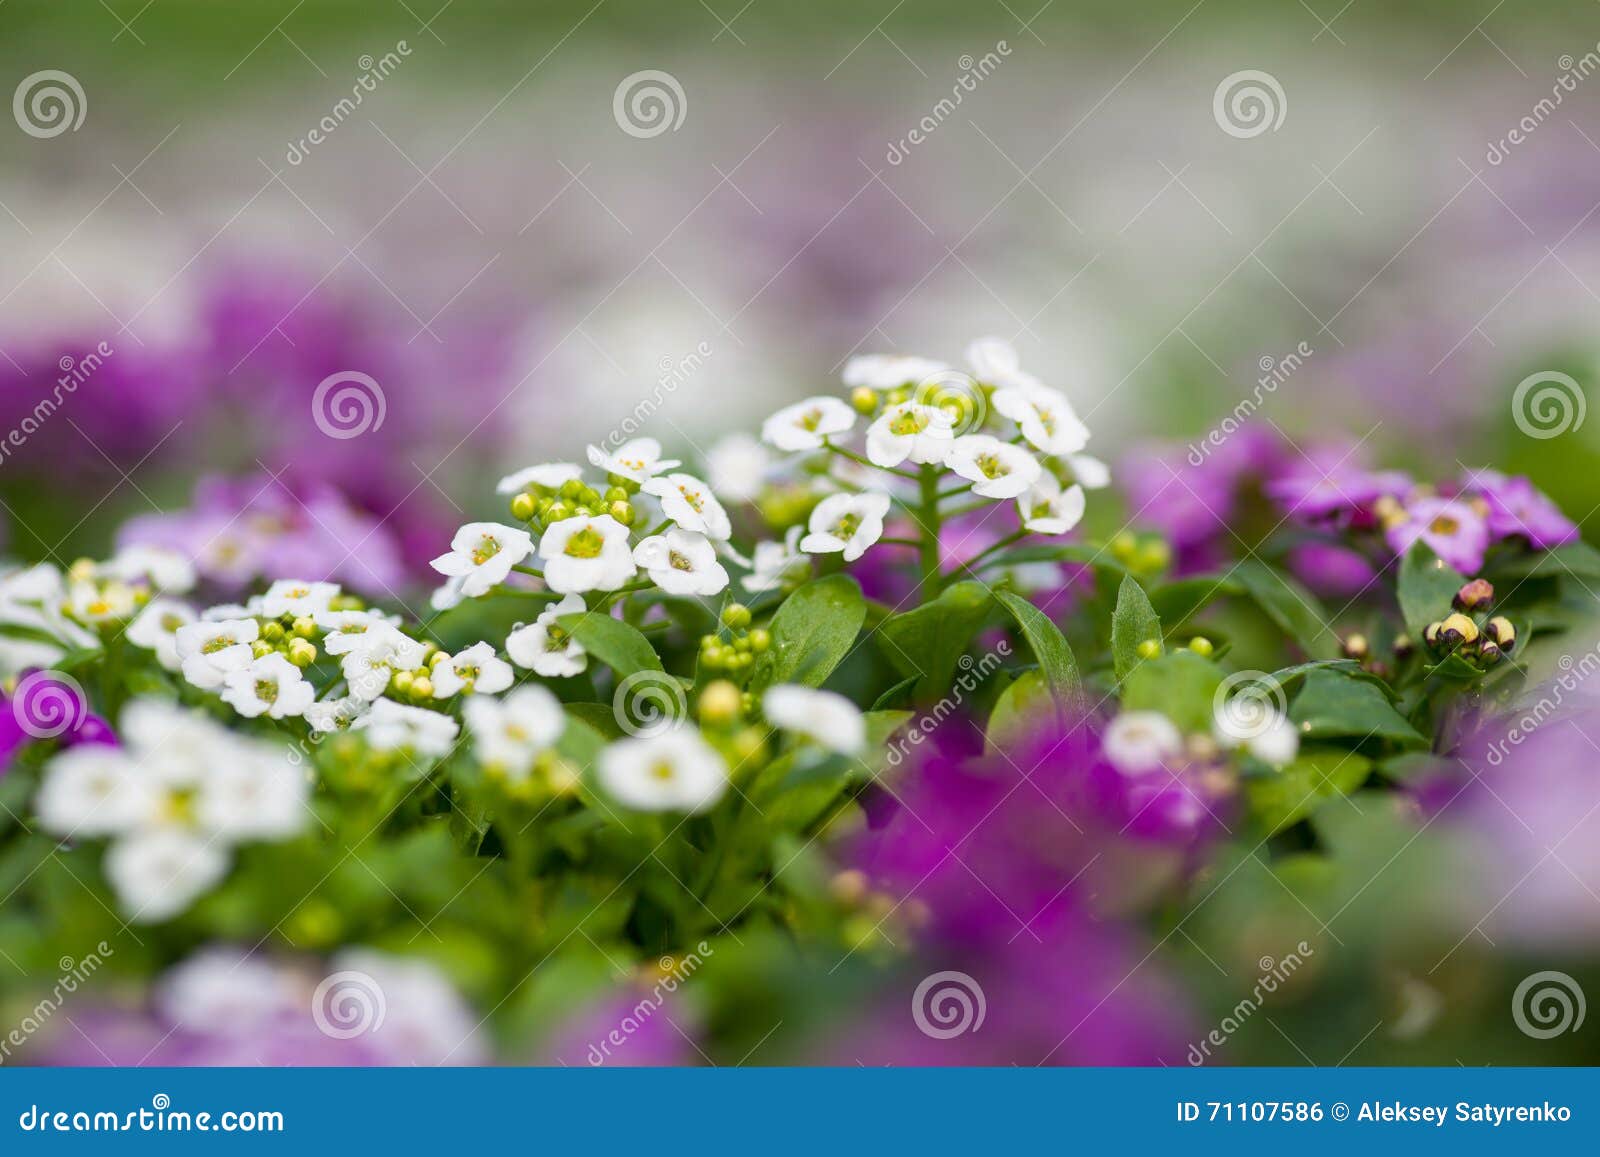 close up of pretty pink, white and purple alyssum flowers, the cruciferae annual flowering plant